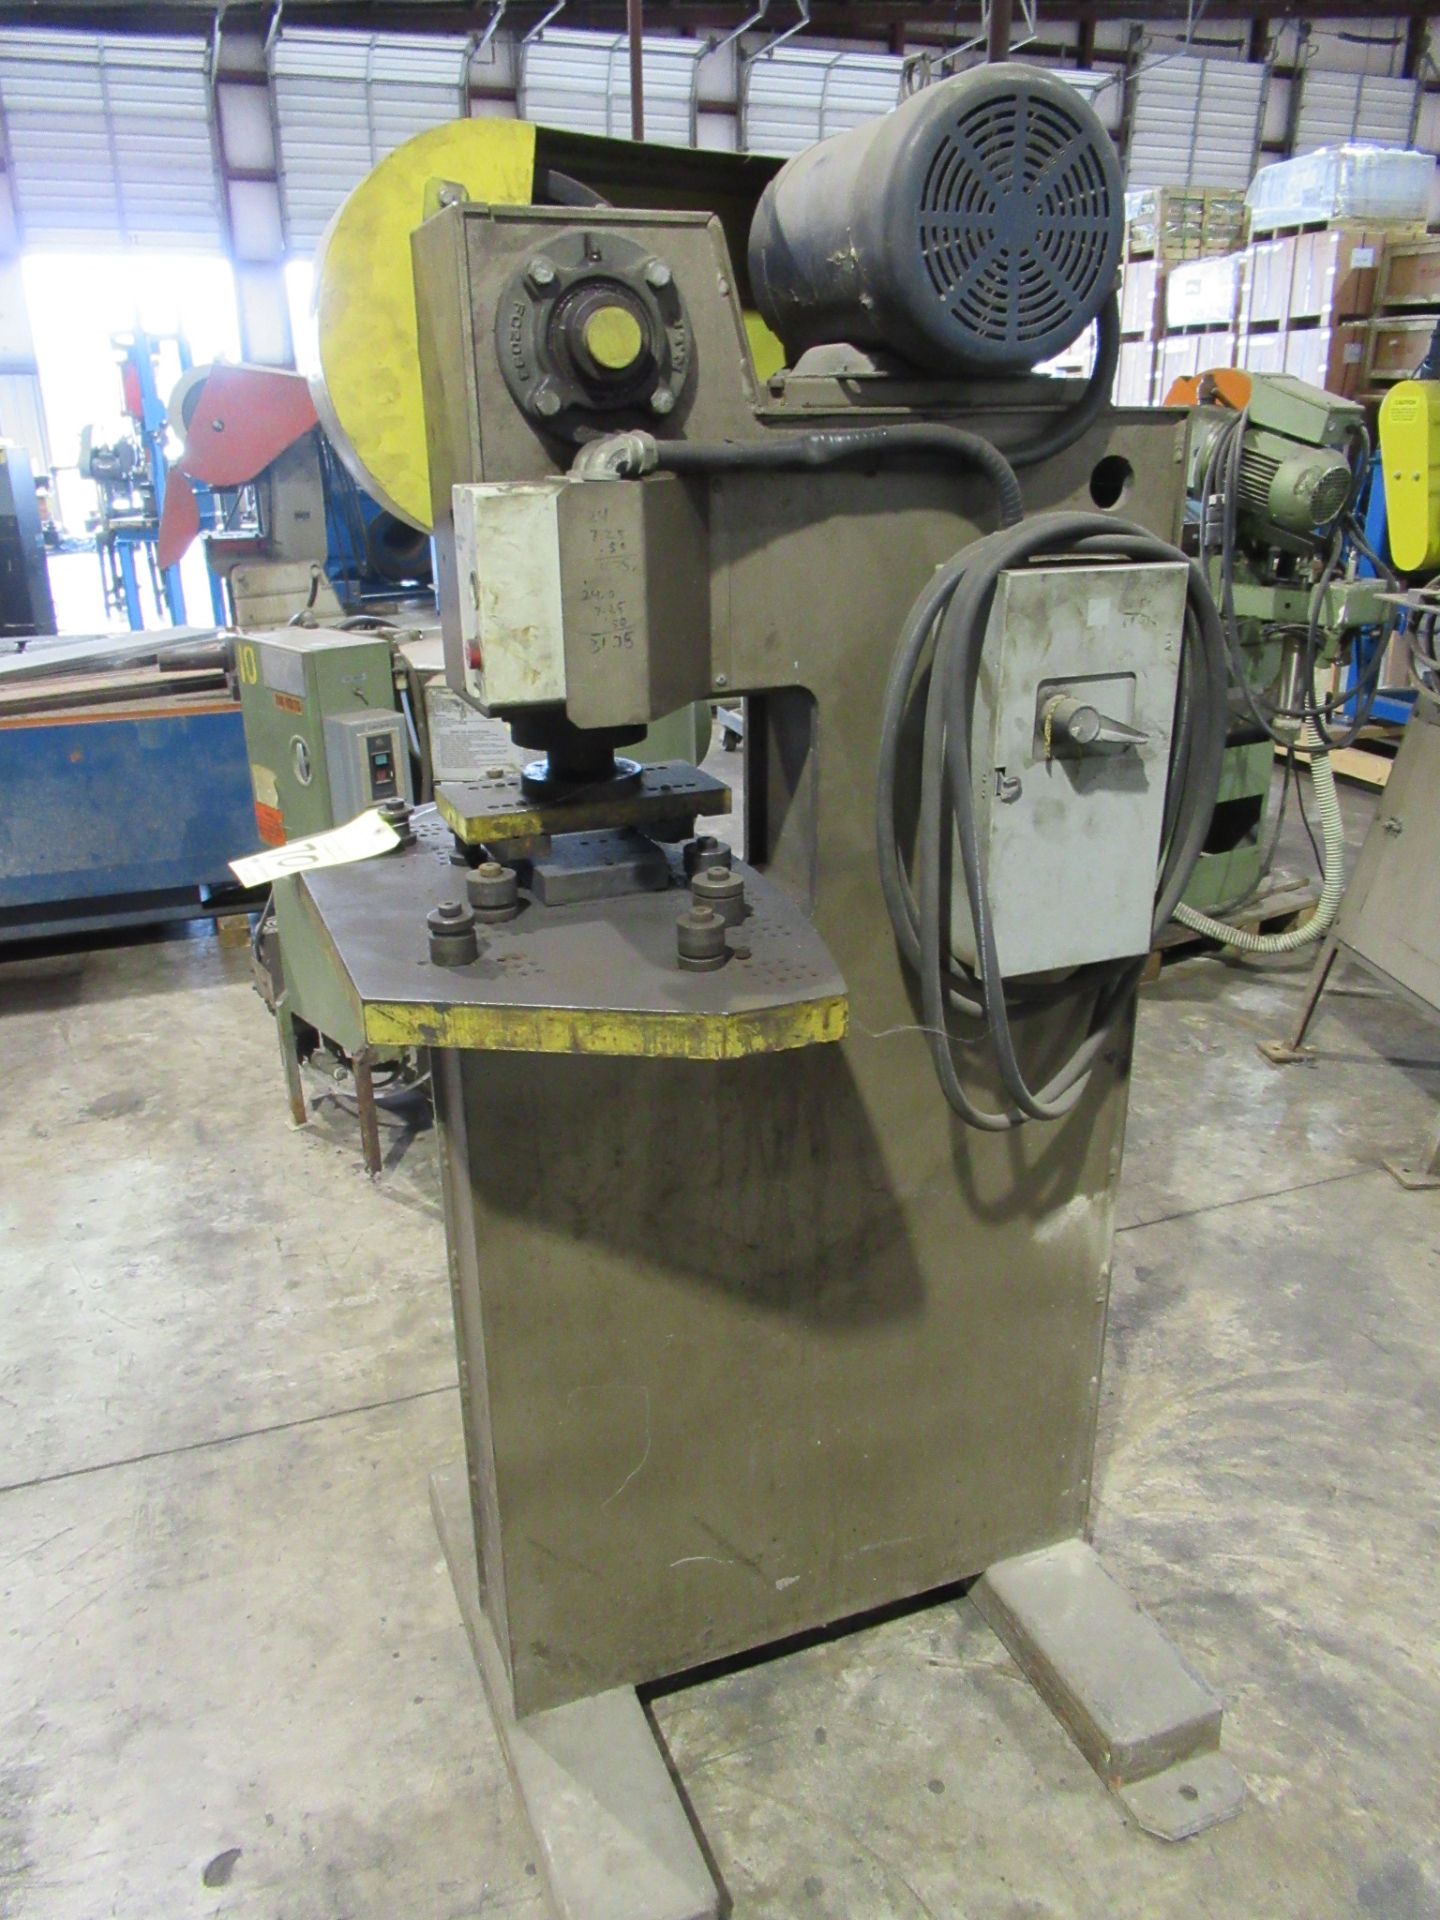 OBI PUNCH PRESS, CUSTOM, Leeson 3 HP motor, S/N N.A. (Location D: Specialized Manufacturing, 8101 - Image 2 of 3